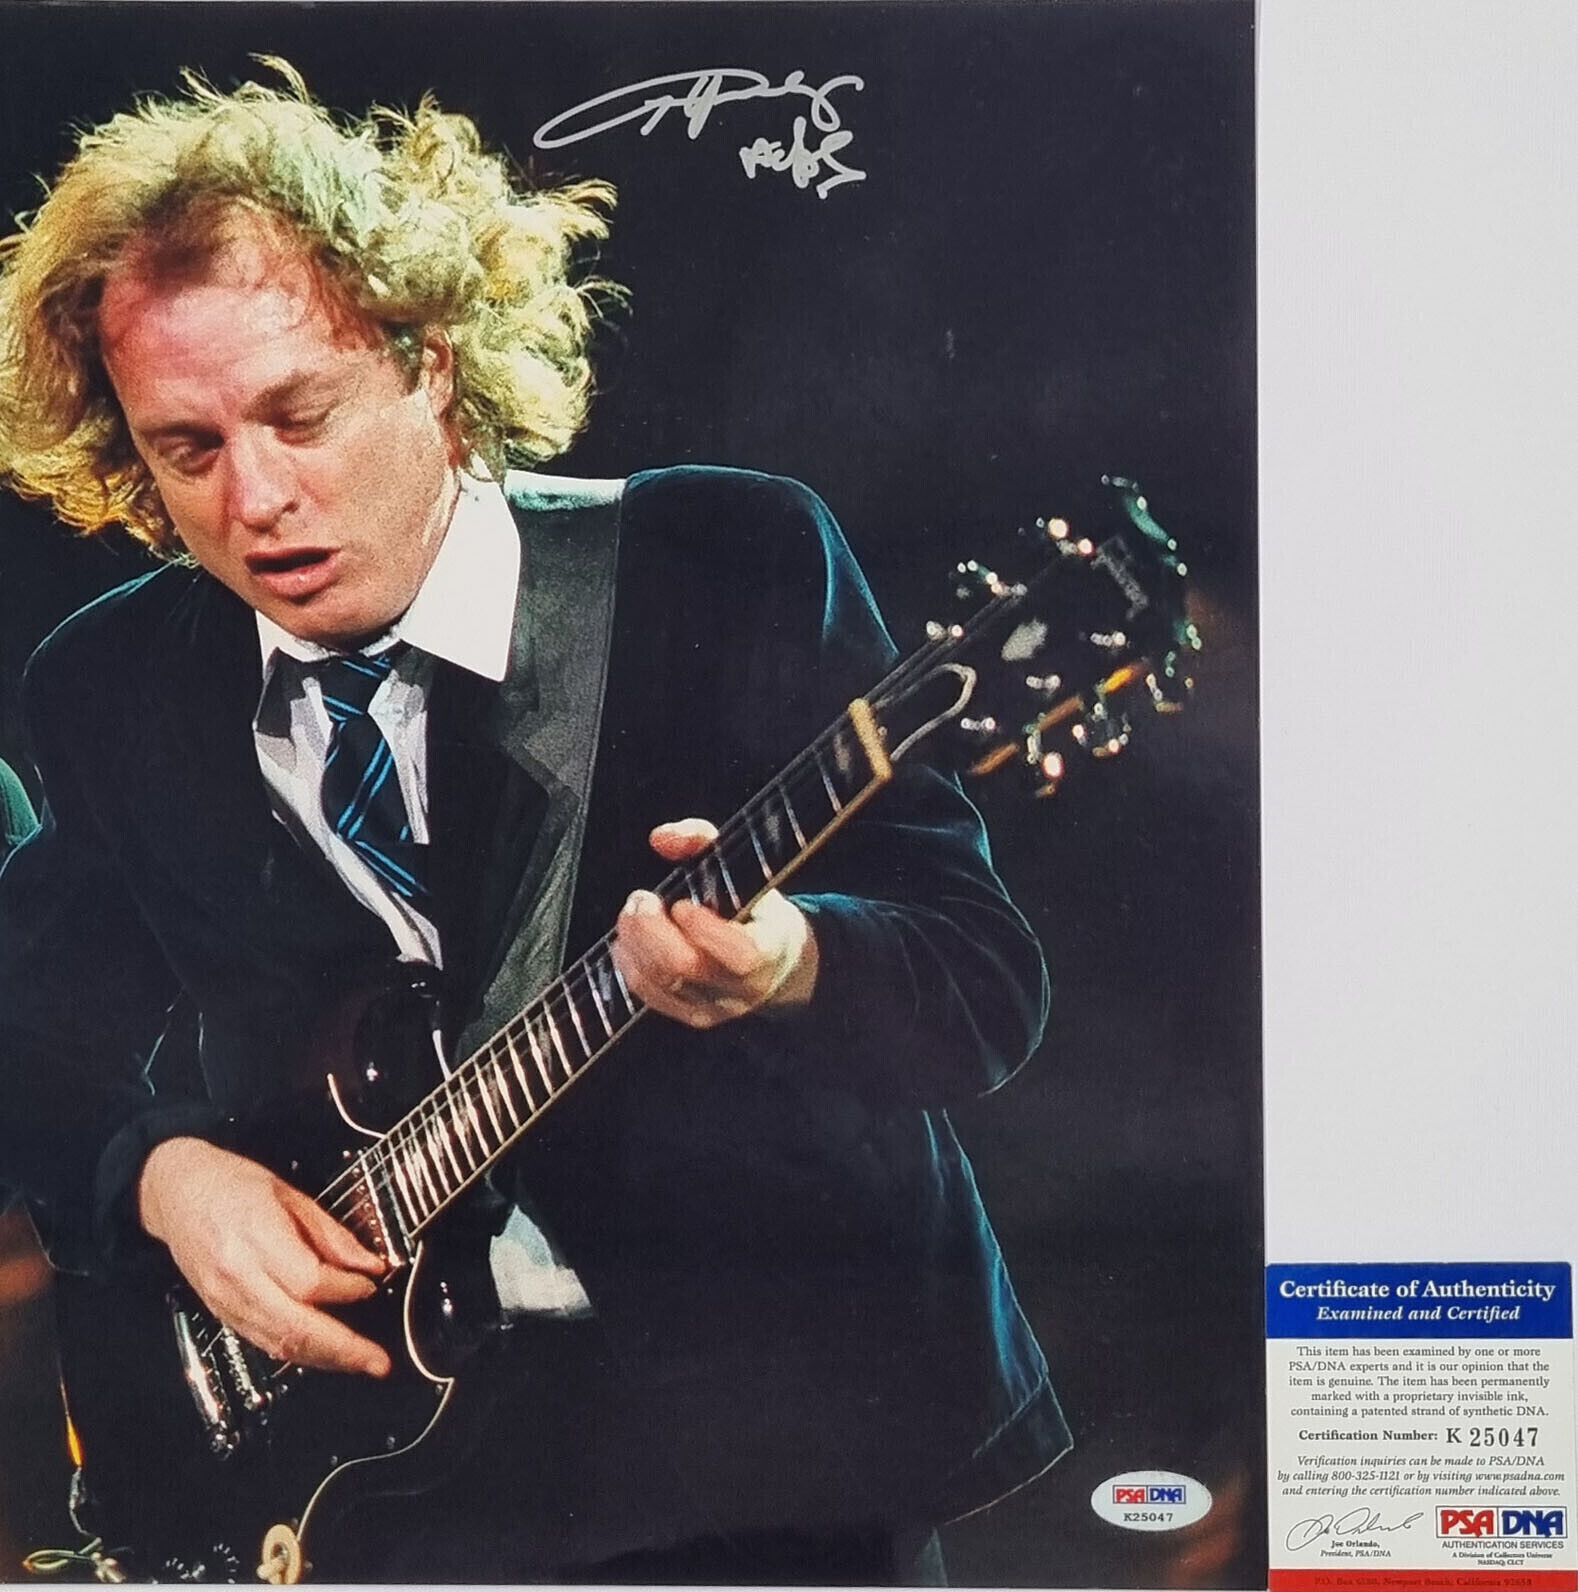 ACDC Angus Young hand signed 11x14 inch photograph (PSA DNA #K25047)